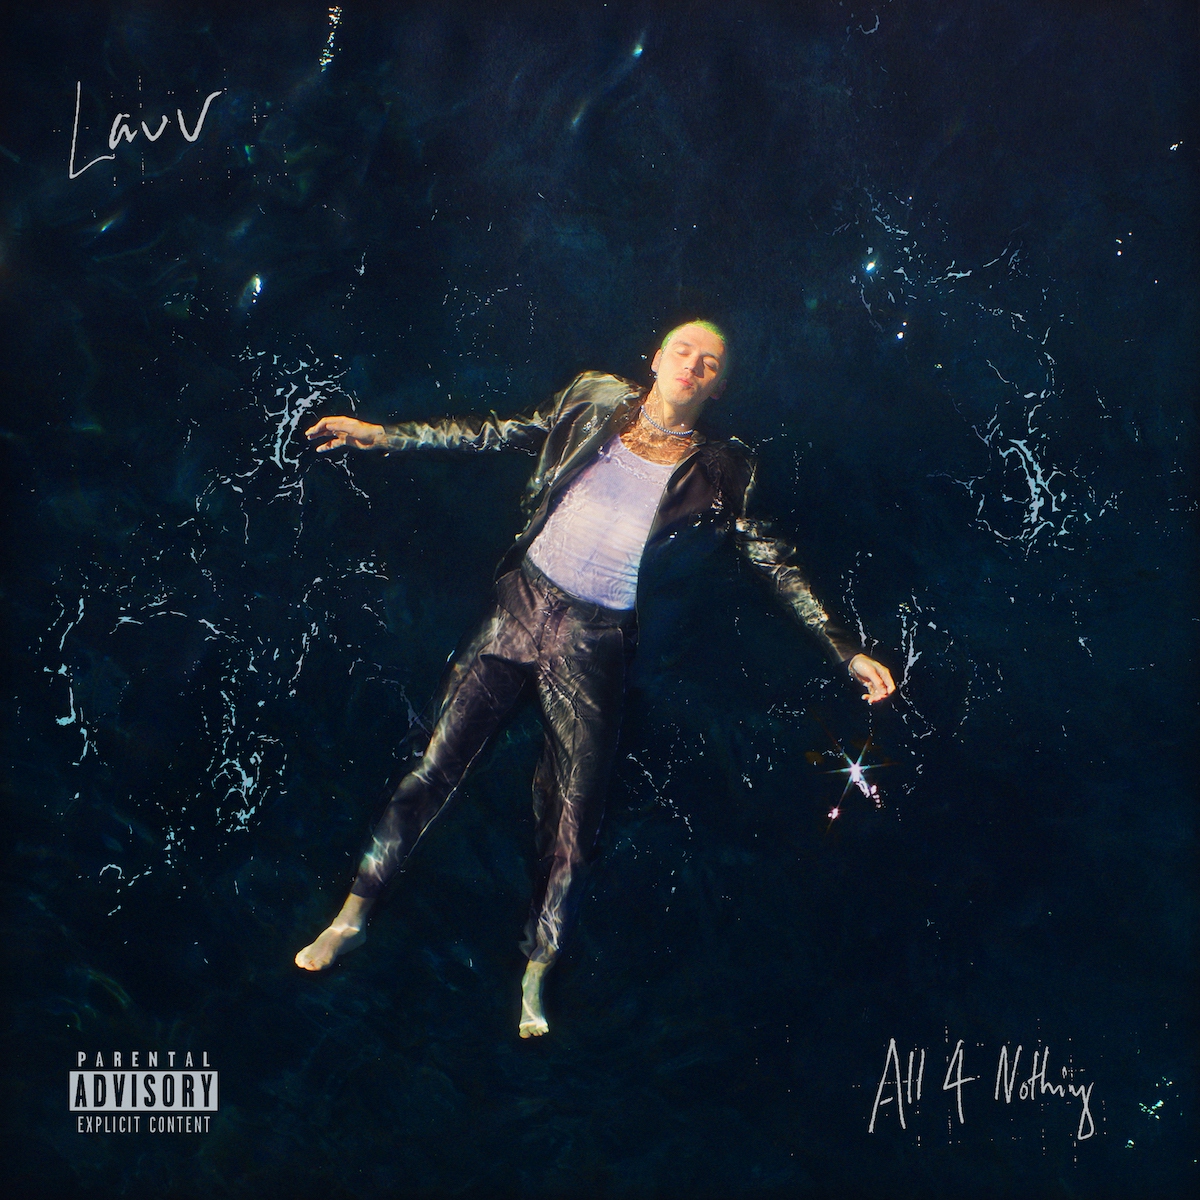 Album artwork for All 4 Nothing by Lauv